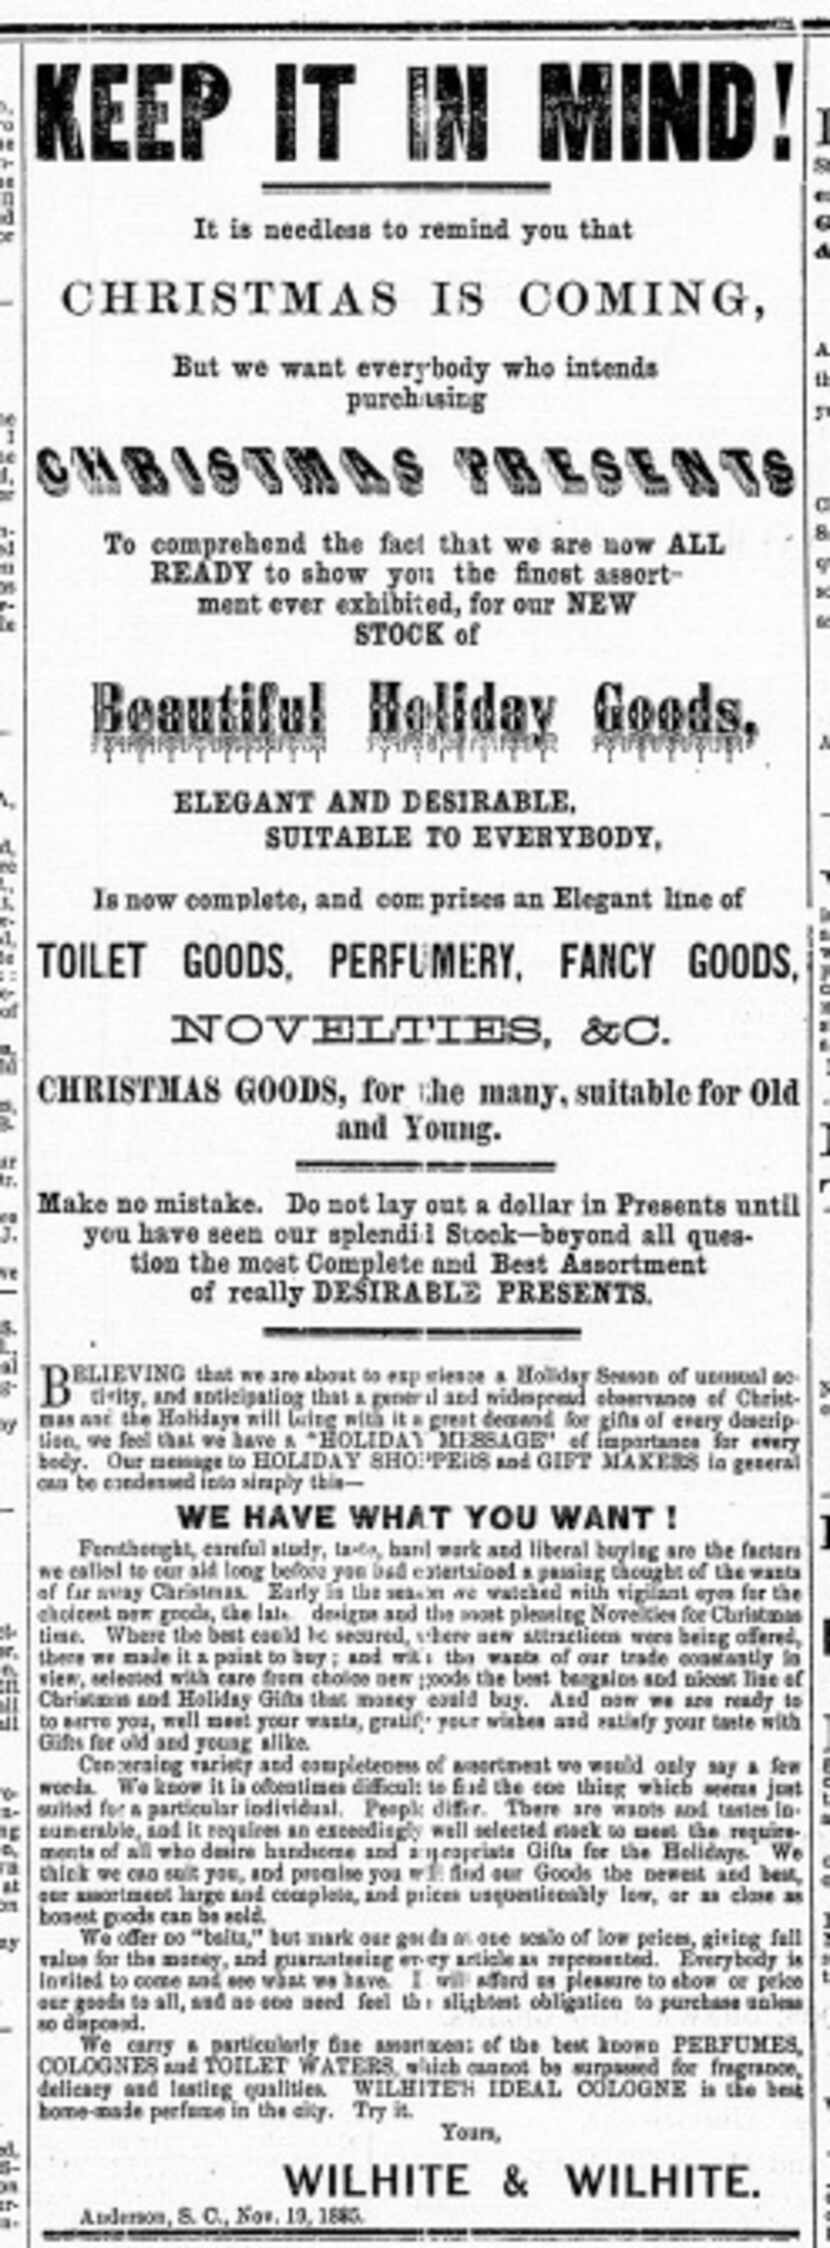 An 1885 South Carolina ad for early shopping was novel enough to warrant explanation.